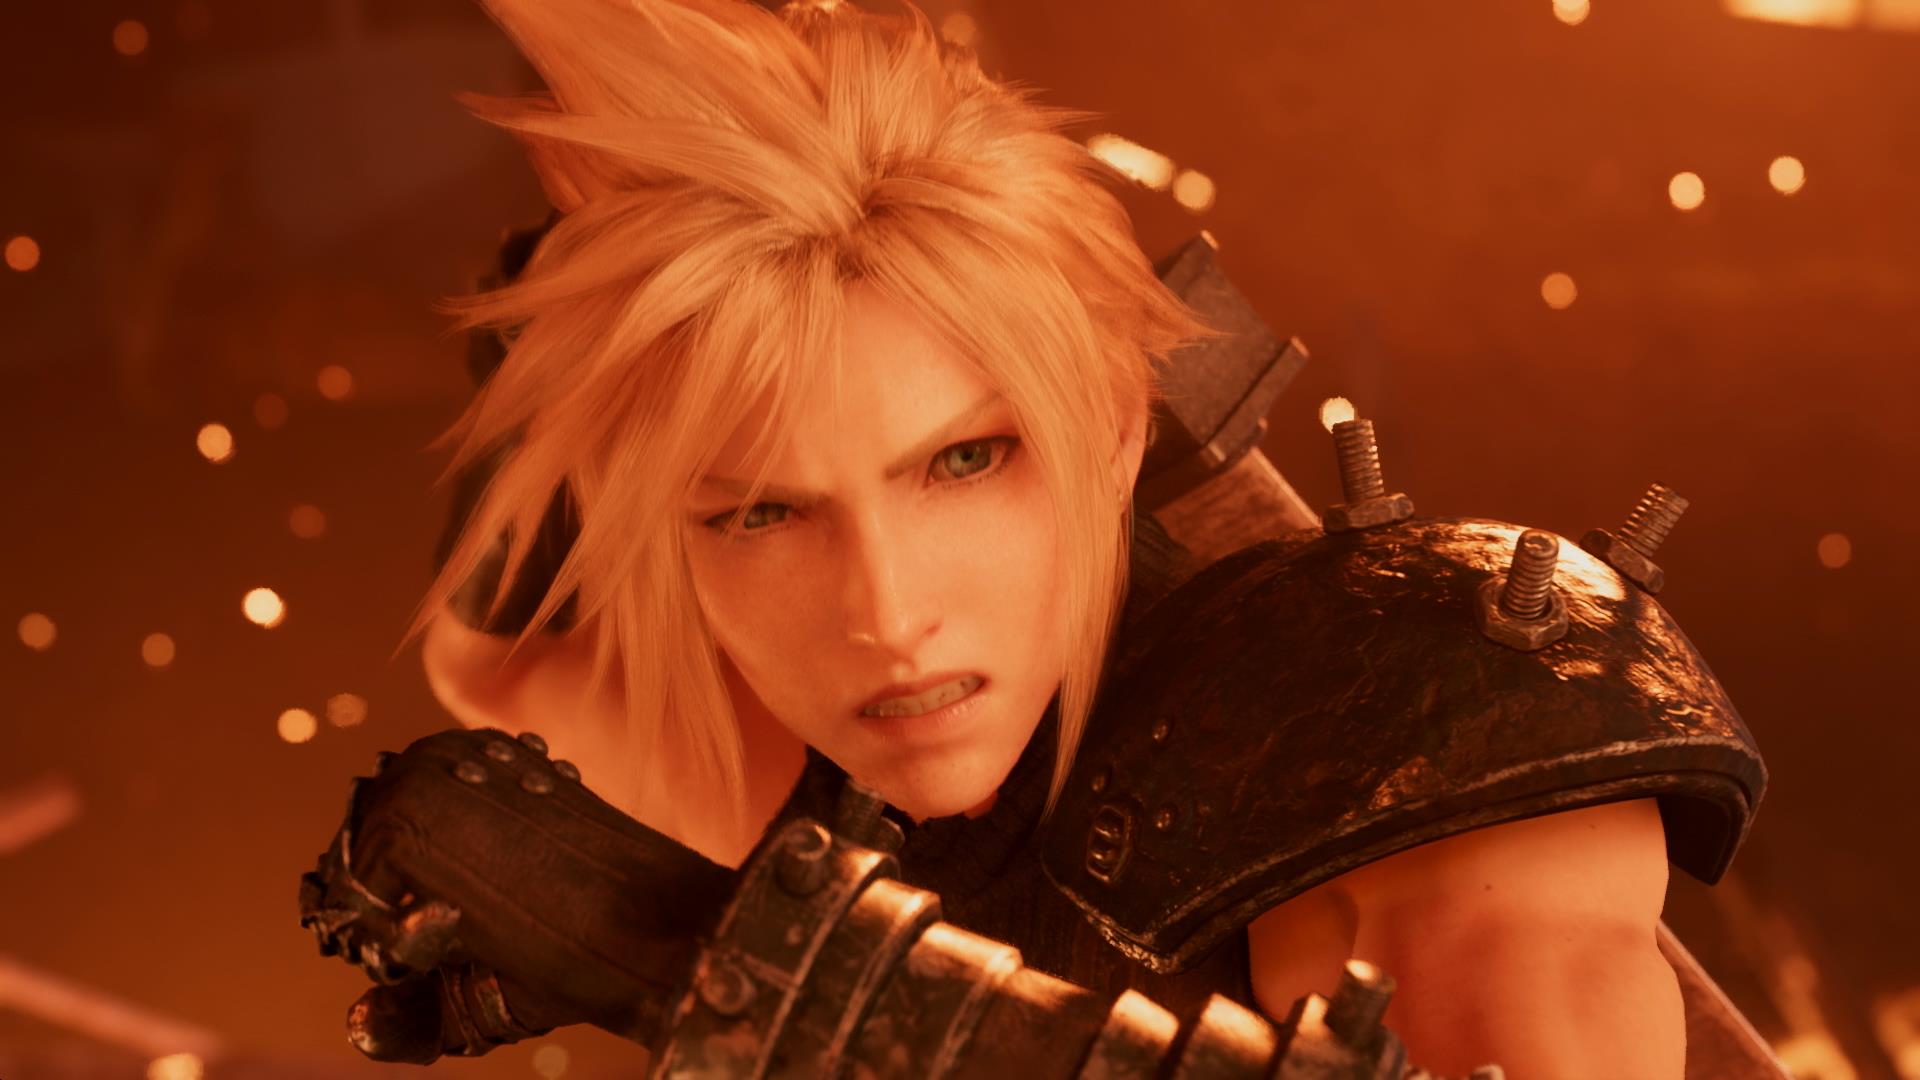 Final Fantasy 7 Remake Part 2 Update: Every Detail Revealed So Far 